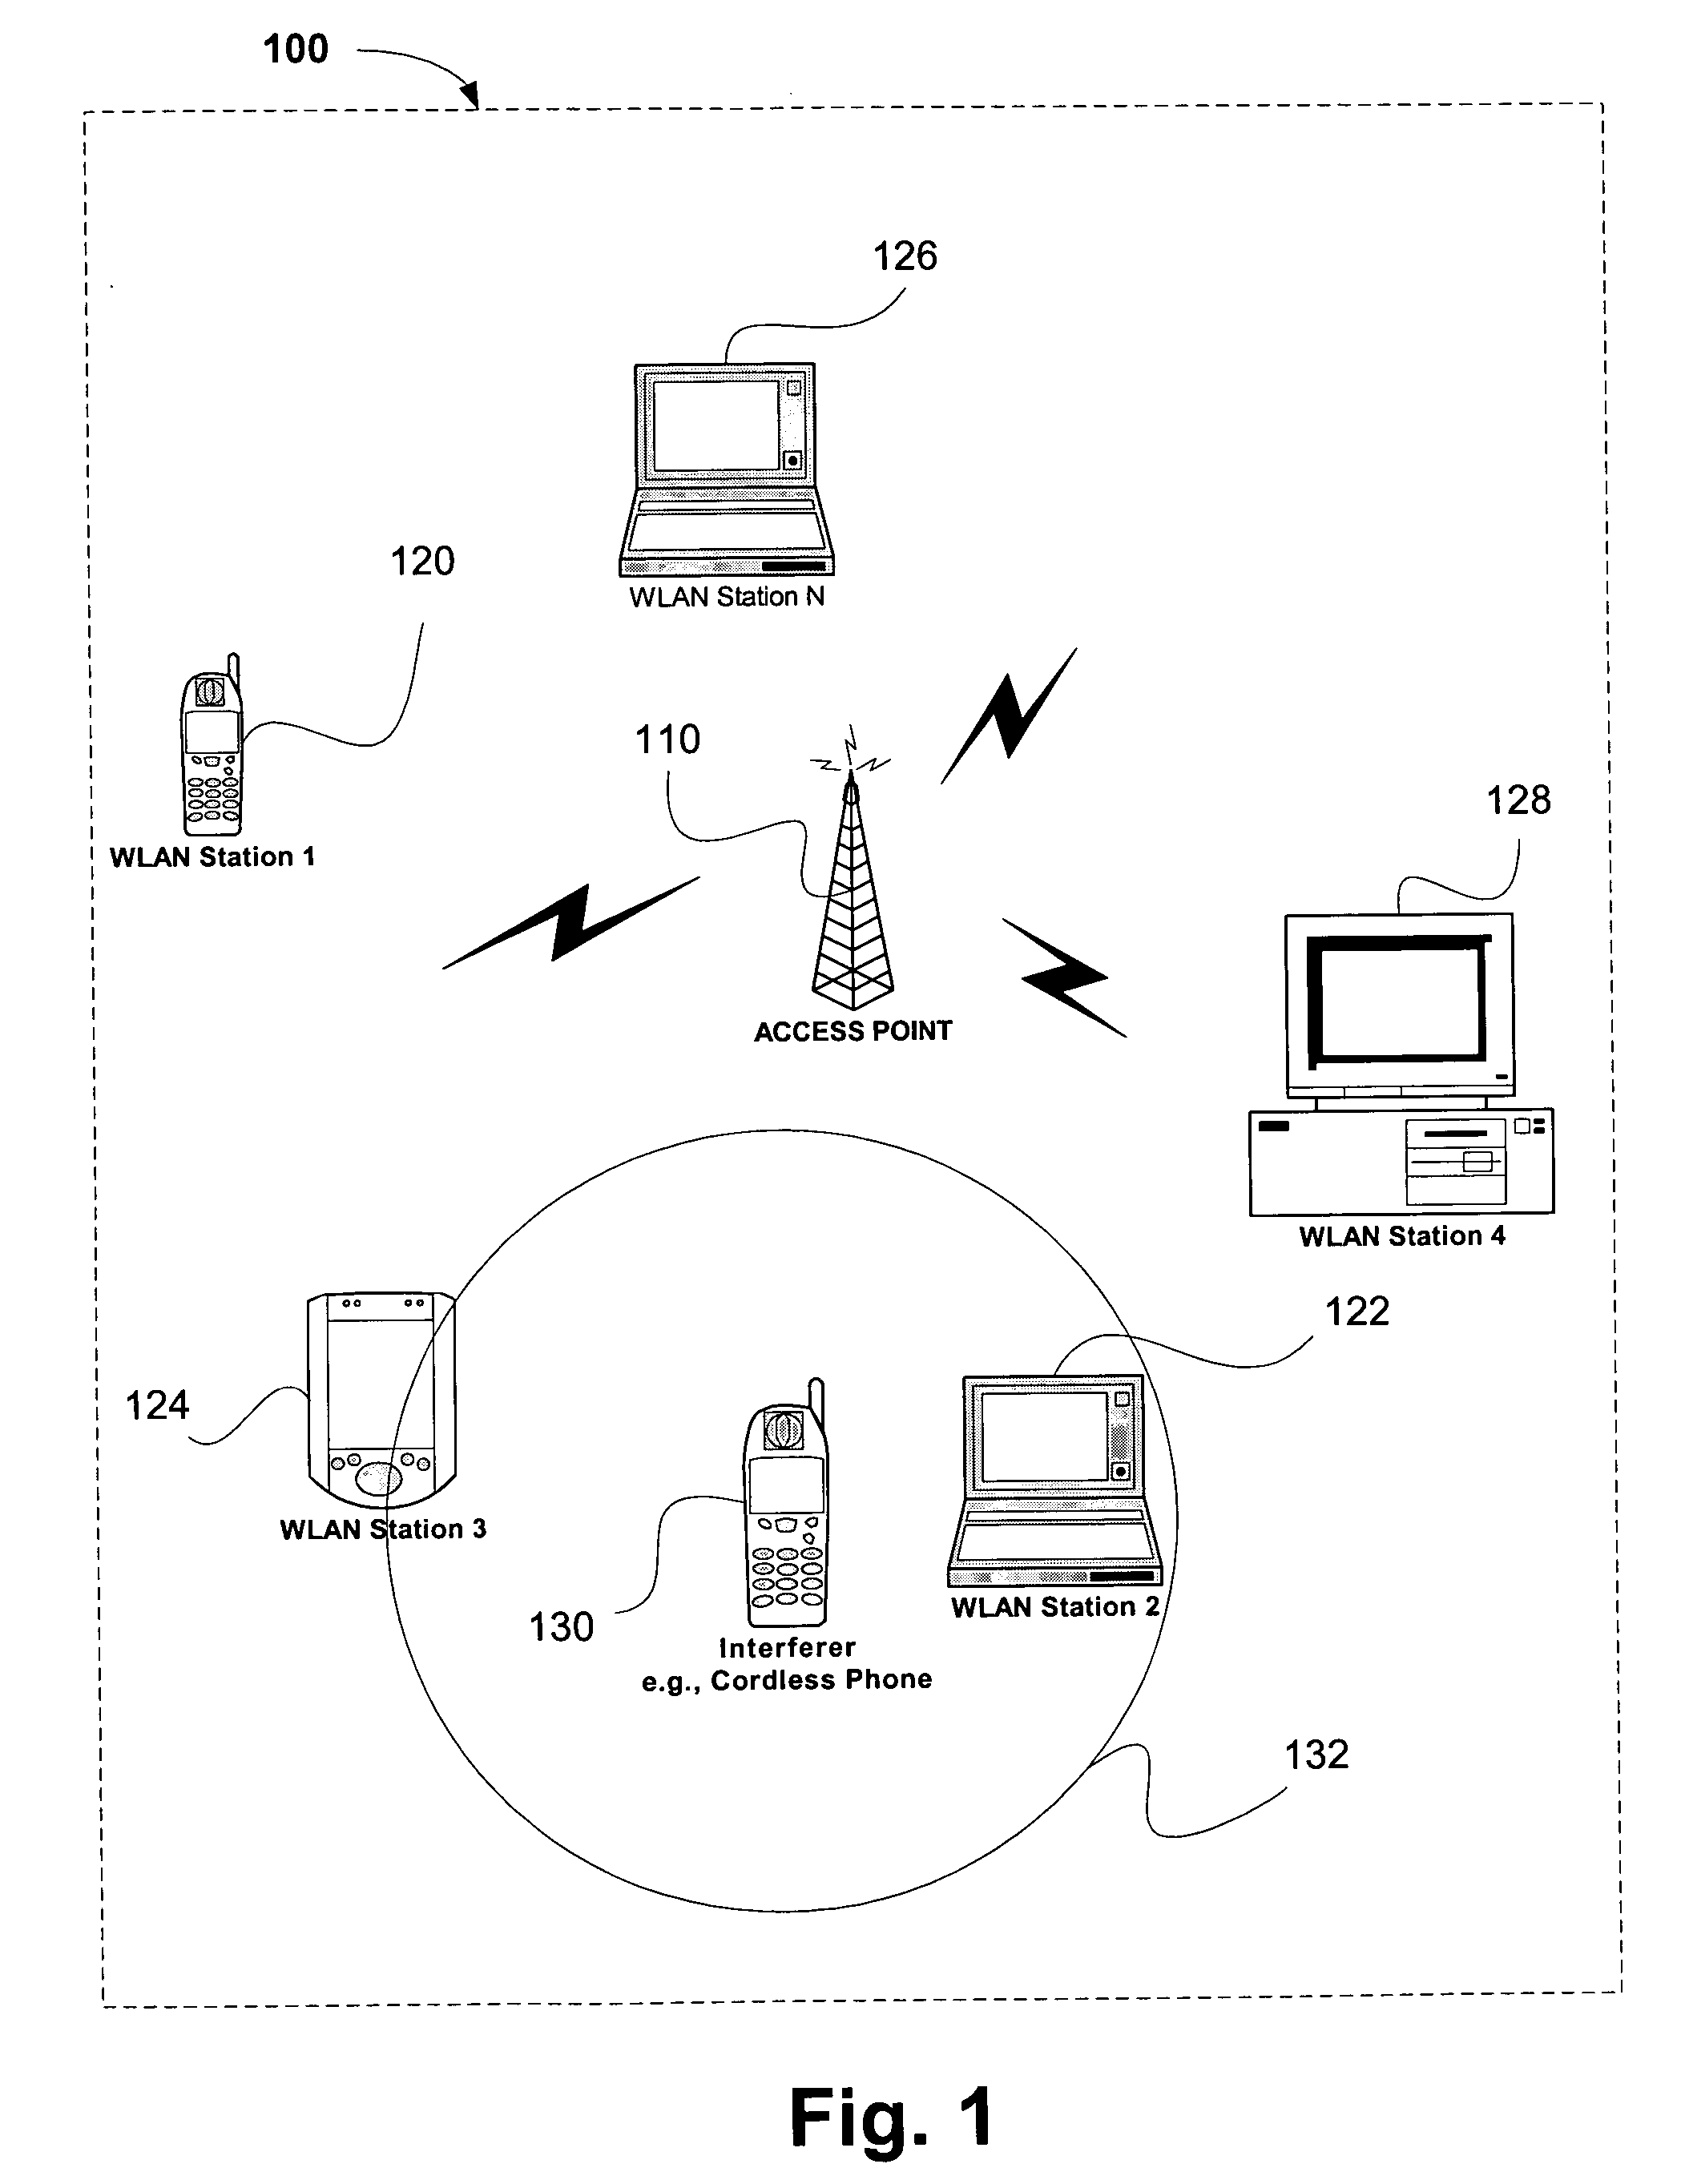 Locating interfering devices in wireless networks using channel adaptation metrics